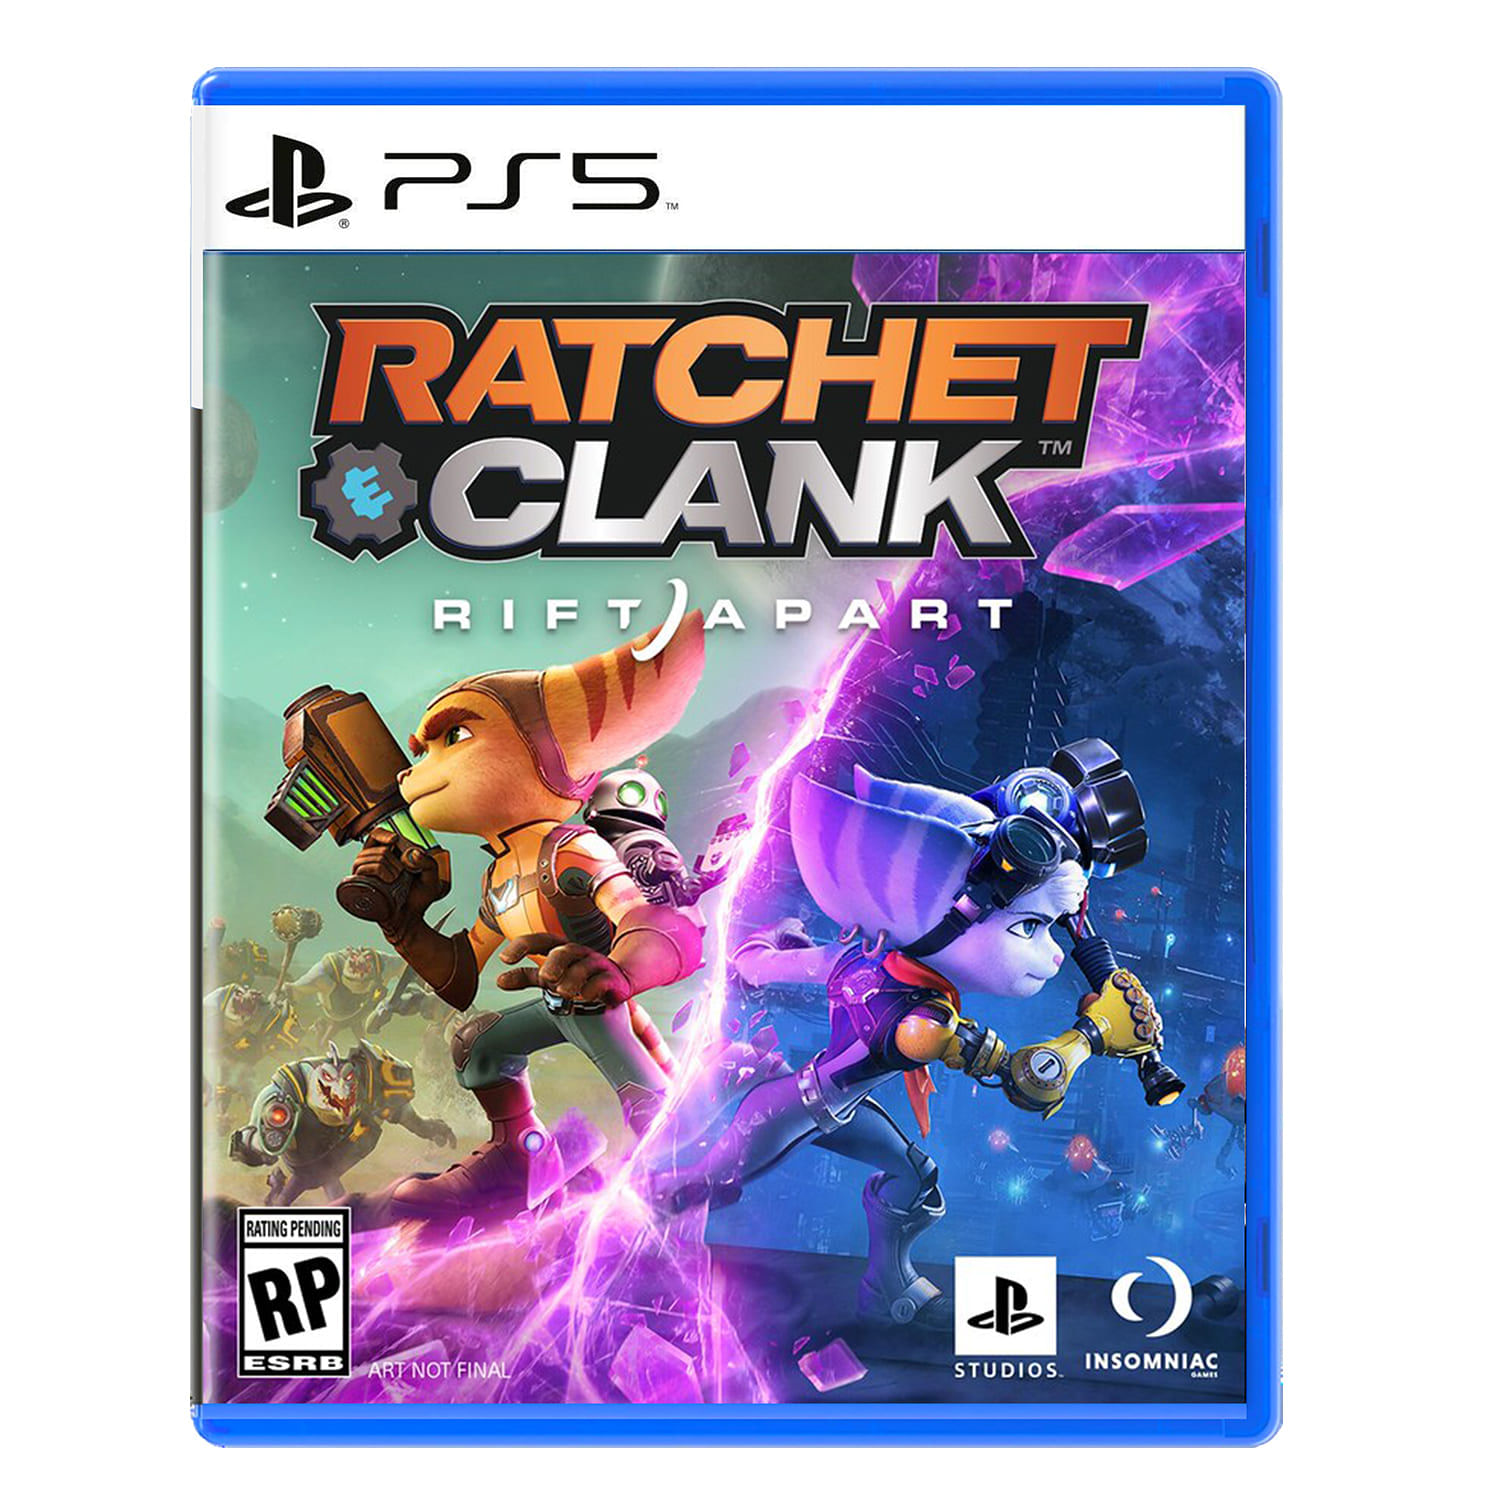 Juego Ratchet & Clank Rift Apart Ps5